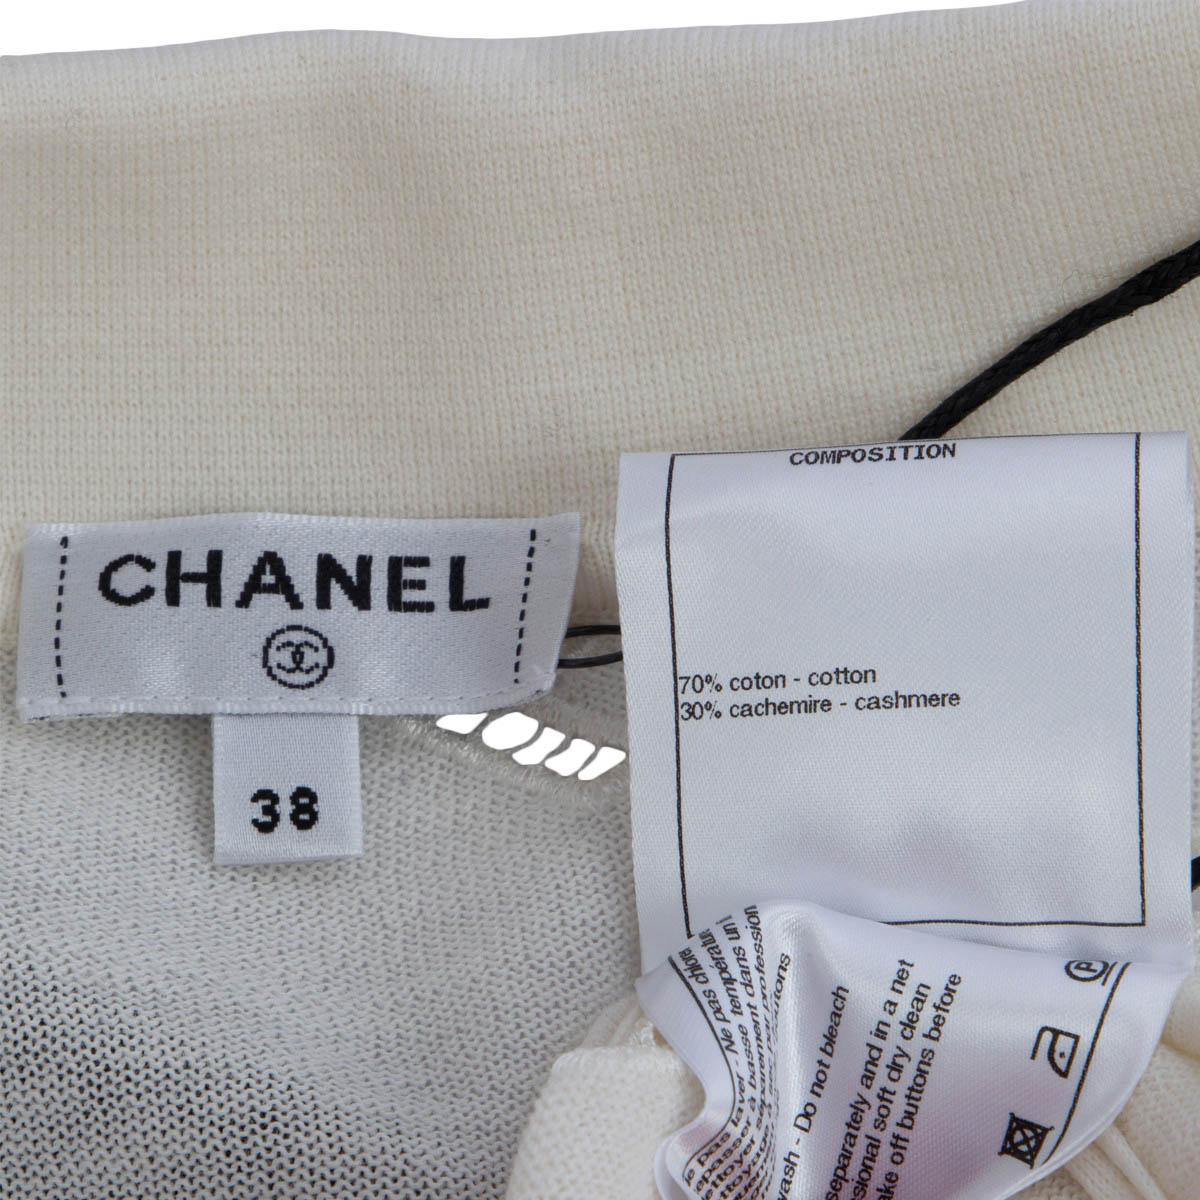 CHANEL ivory cotton 2020 20C LOGO EMBROIDERED Cardigan Sweater 38 S 5